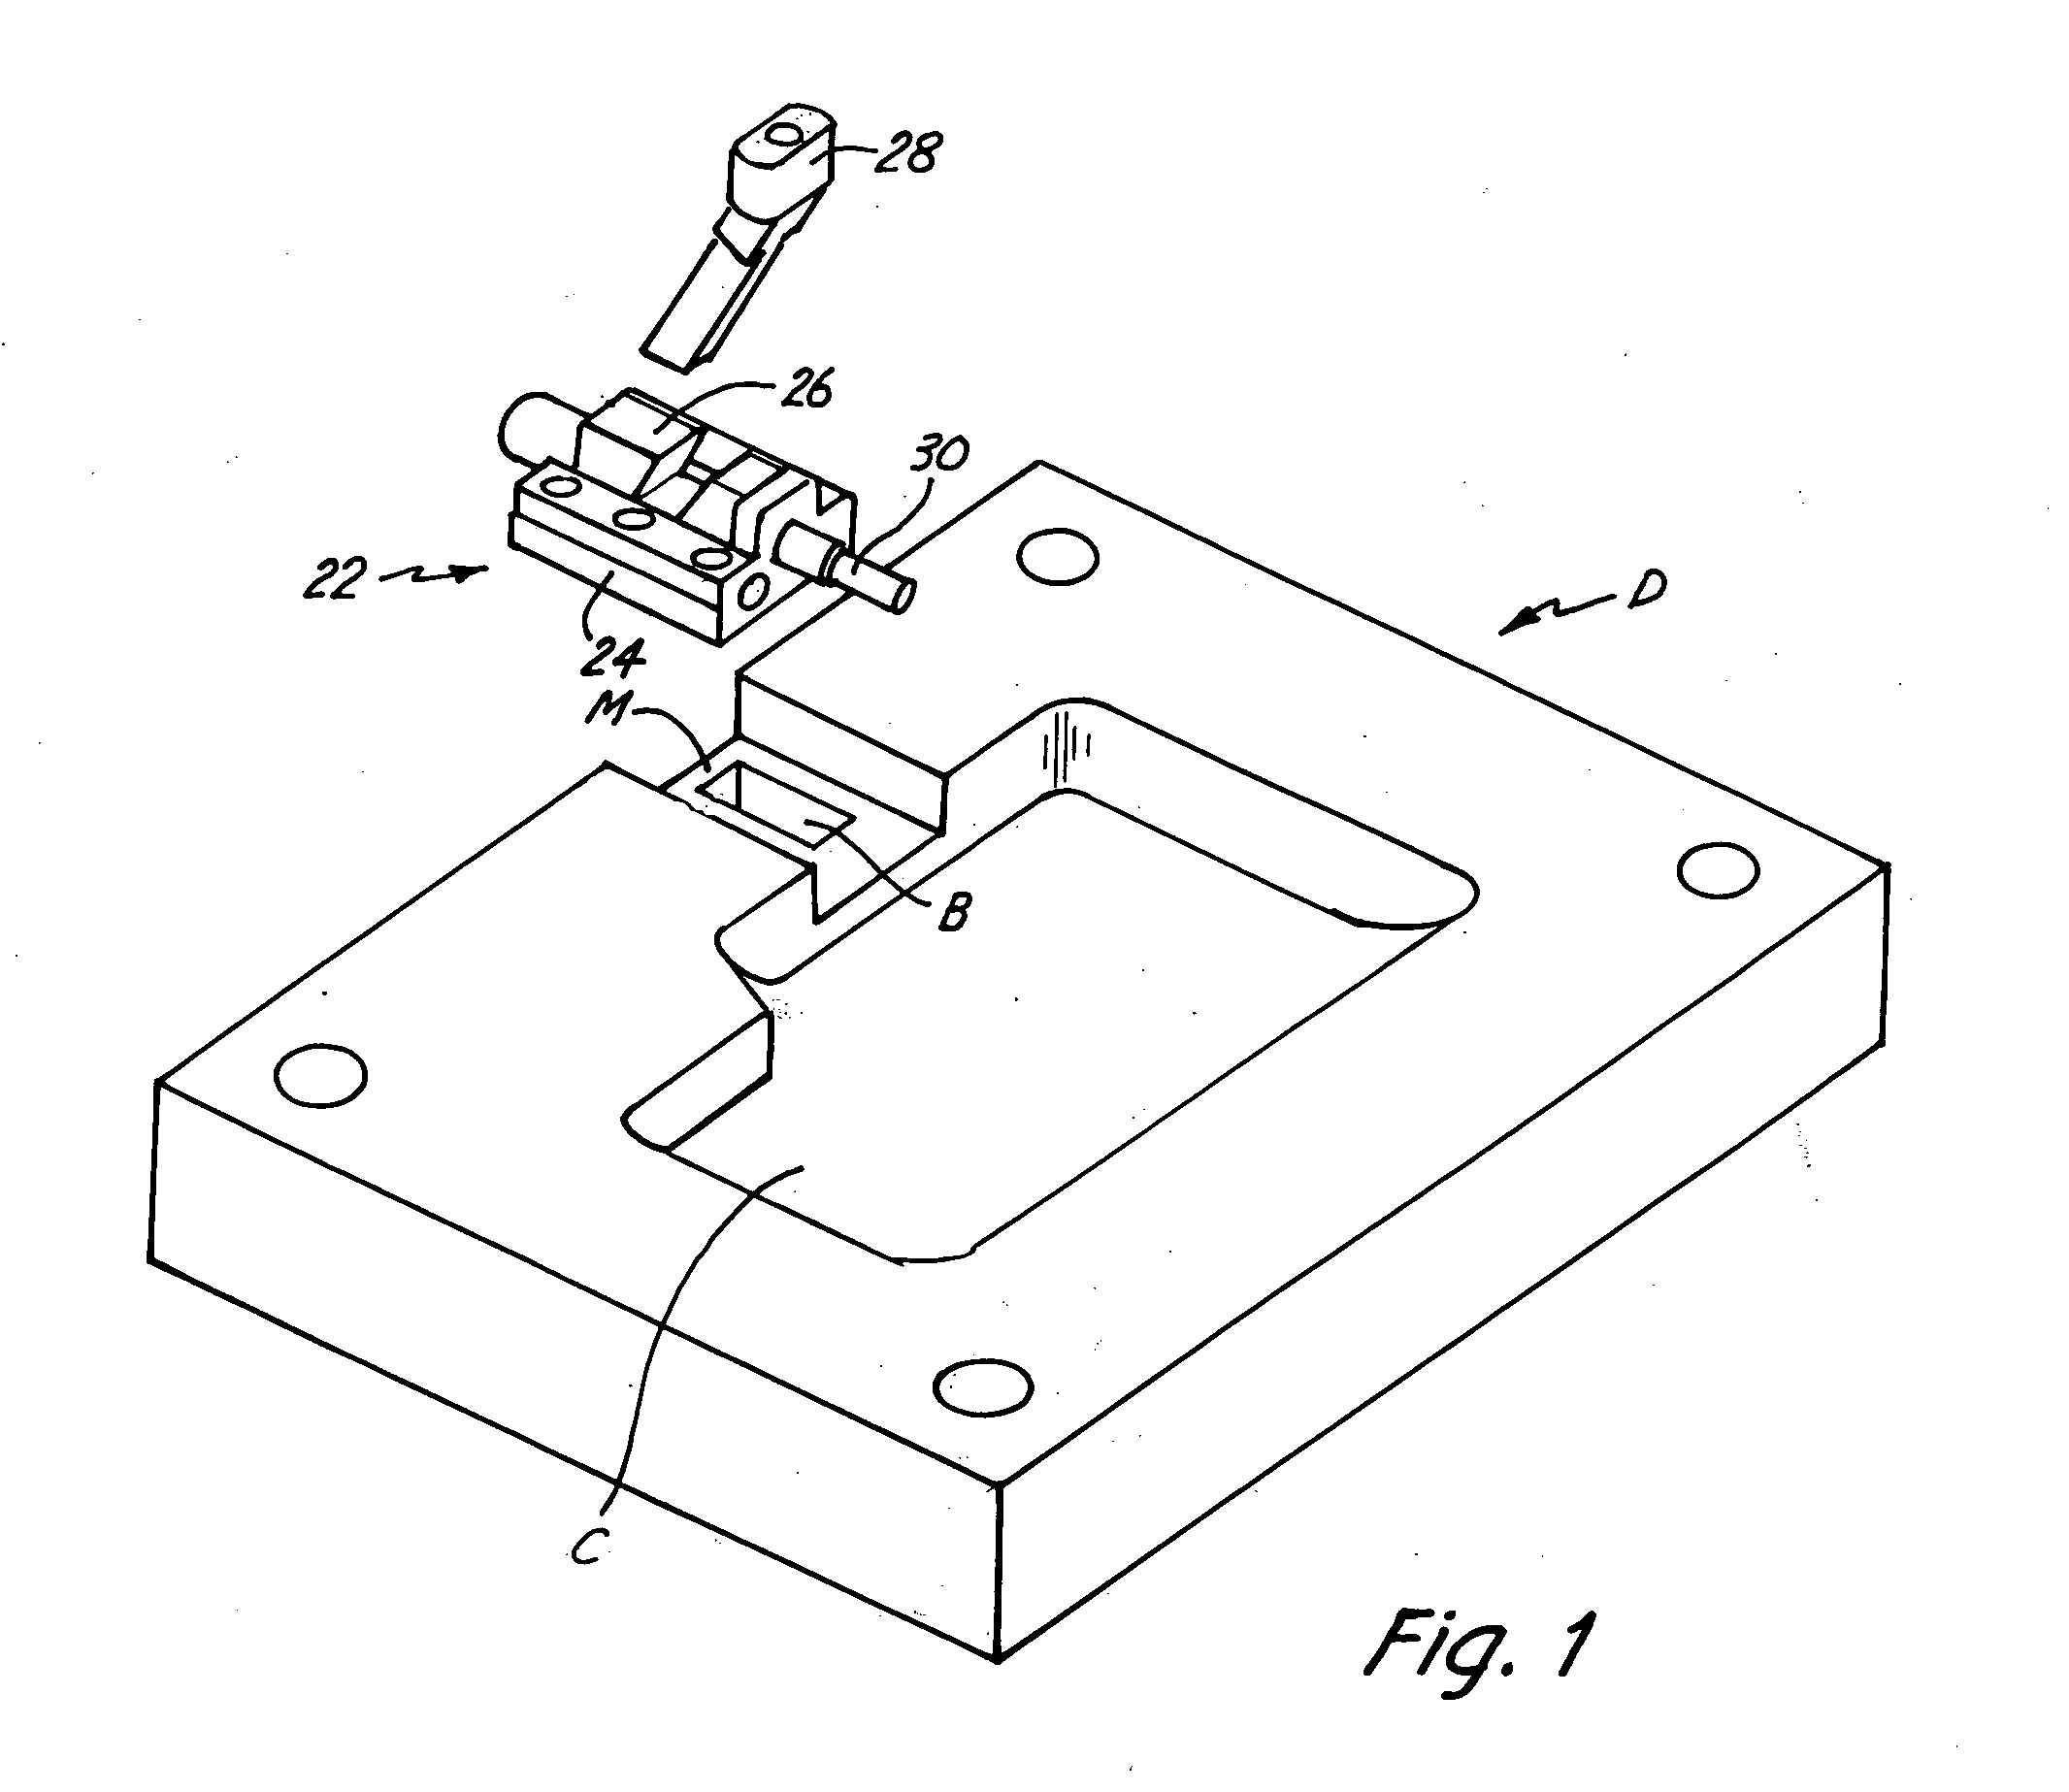 Universal slide assembly for molding and casting systems